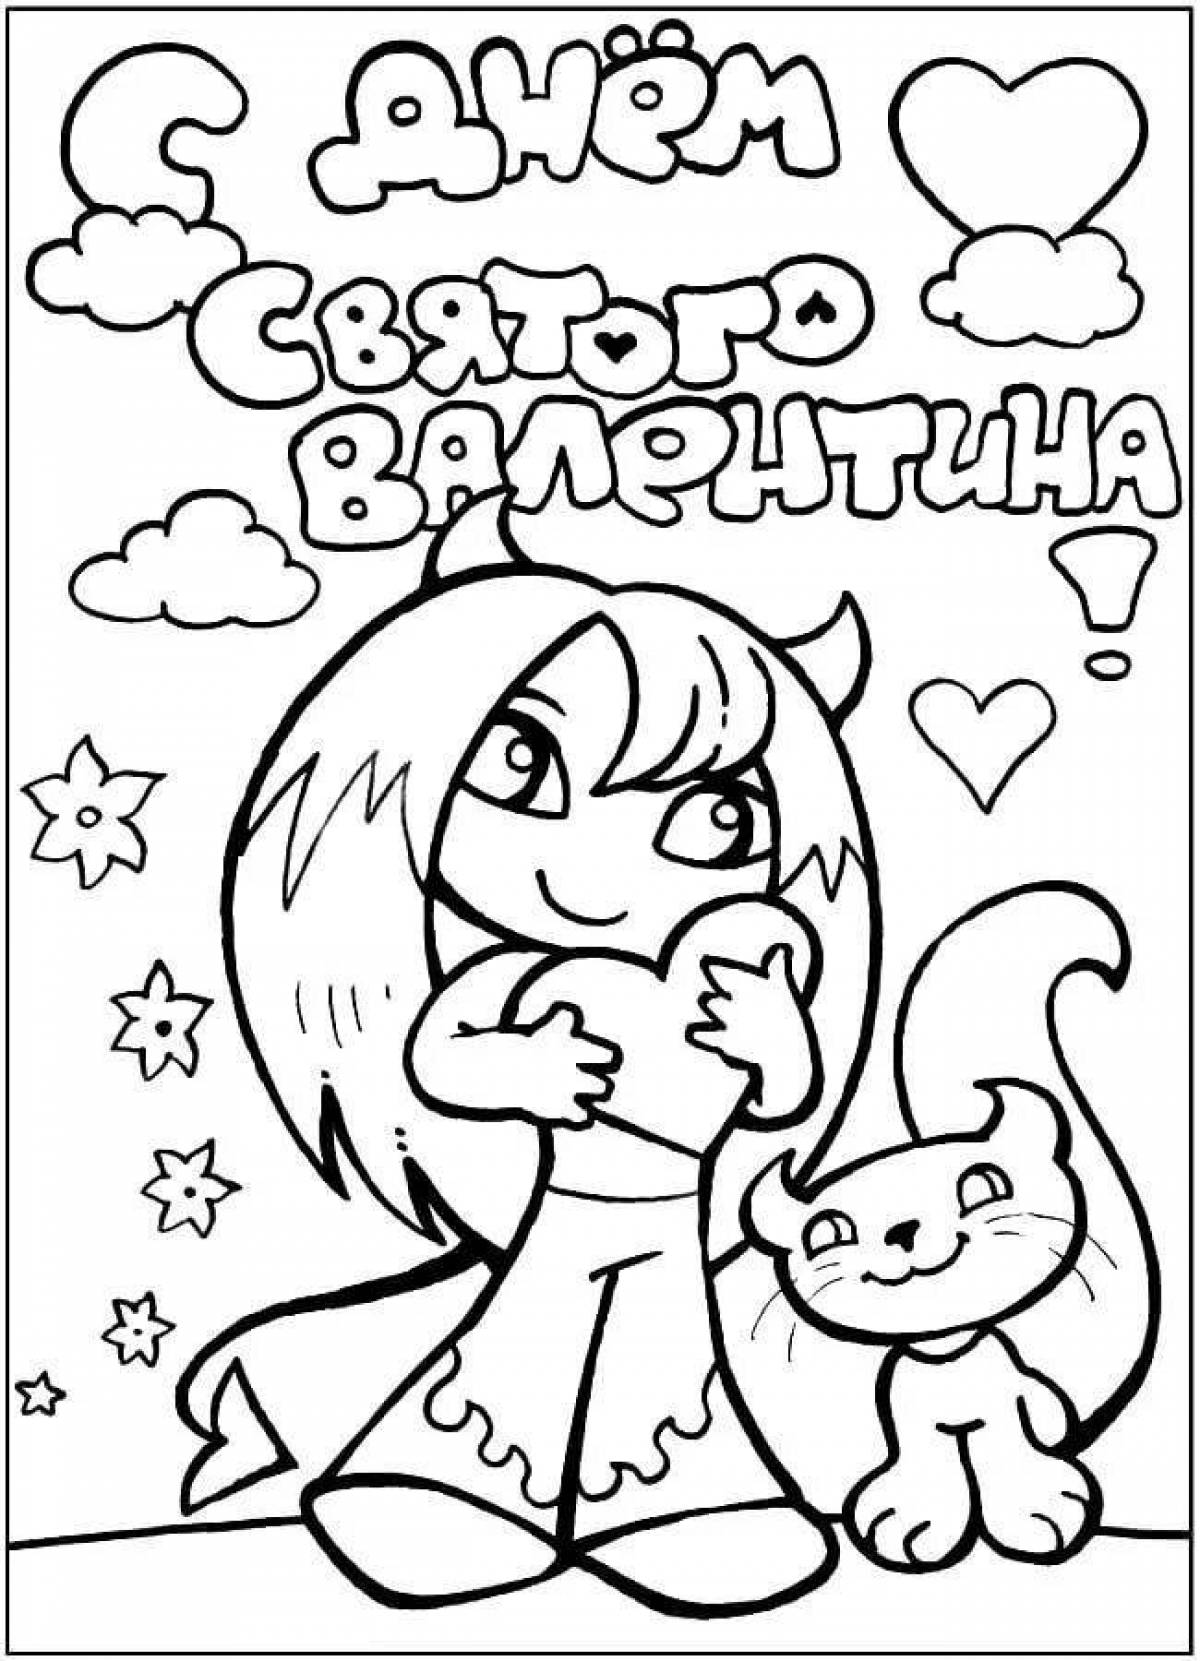 Shiny valentines day coloring page